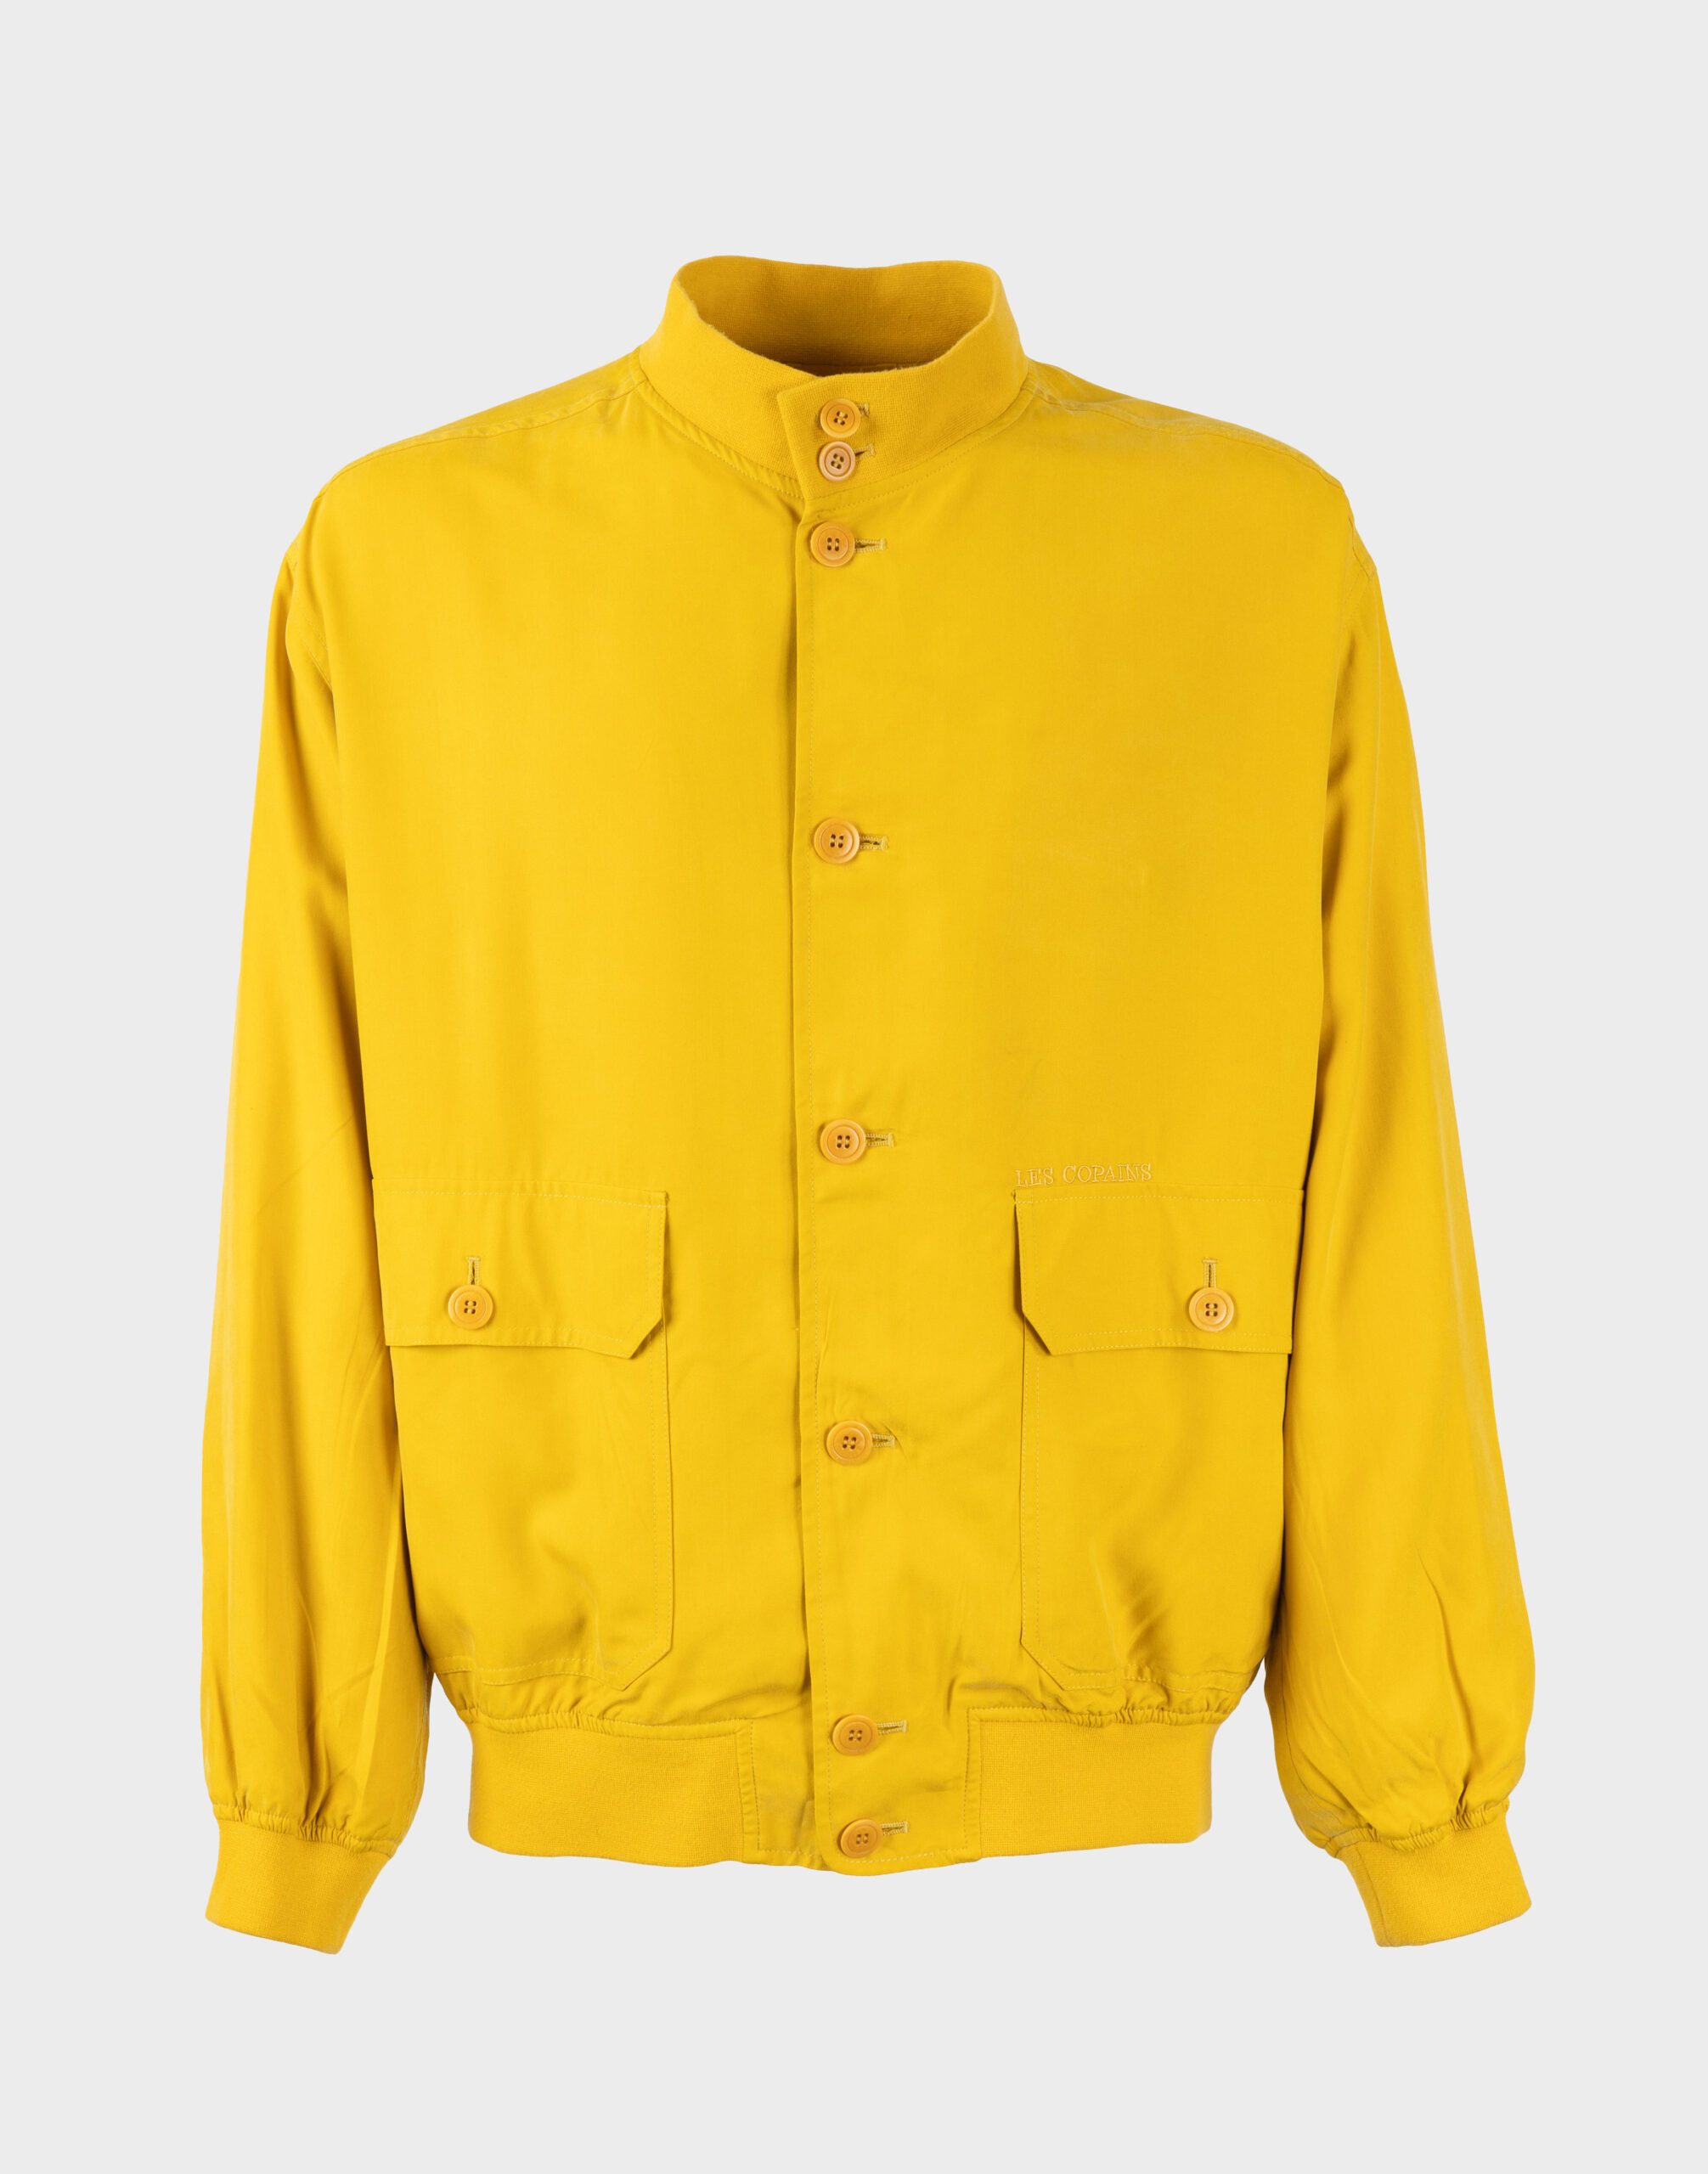 Men's yellow bomber jacket with elastic at the neck, bottom, and cuffs. Front closure with yellow buttons and two pockets.